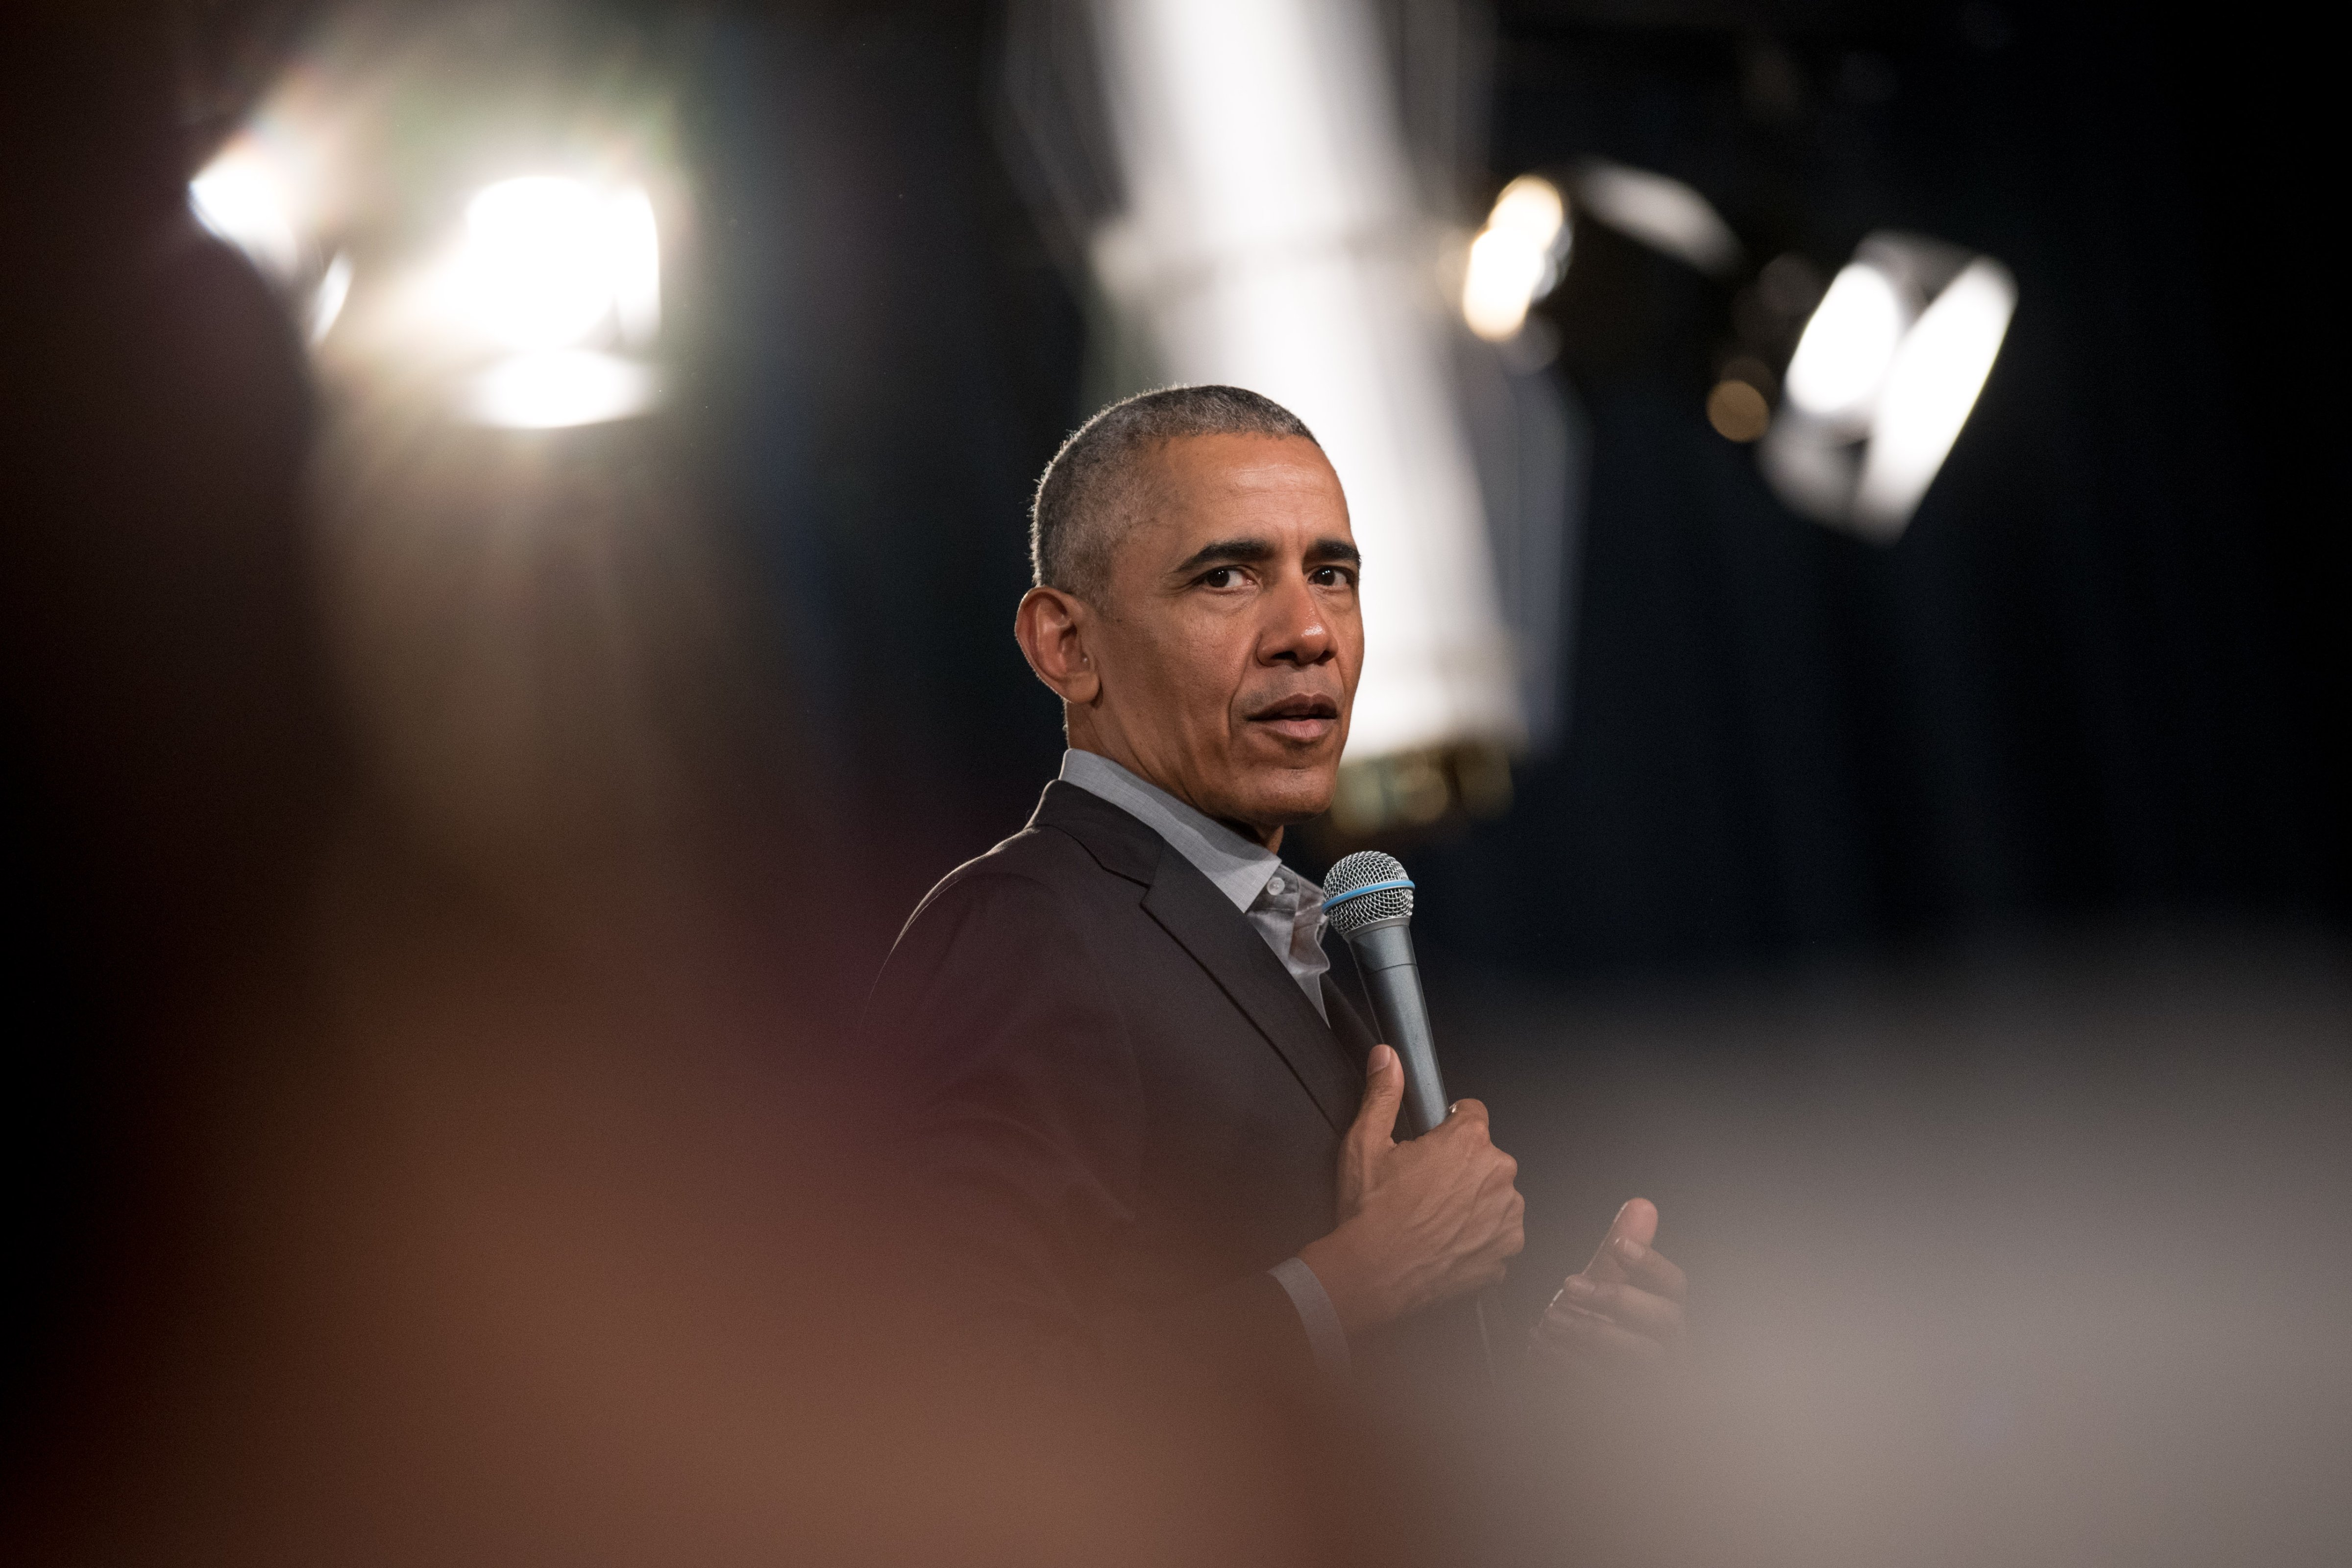 Former U.S. President Barack Obama addresses questions from young people at a town hall event on April 6, 2019 in Berlin. (Jörg Carstensen—DPA/Getty Images)